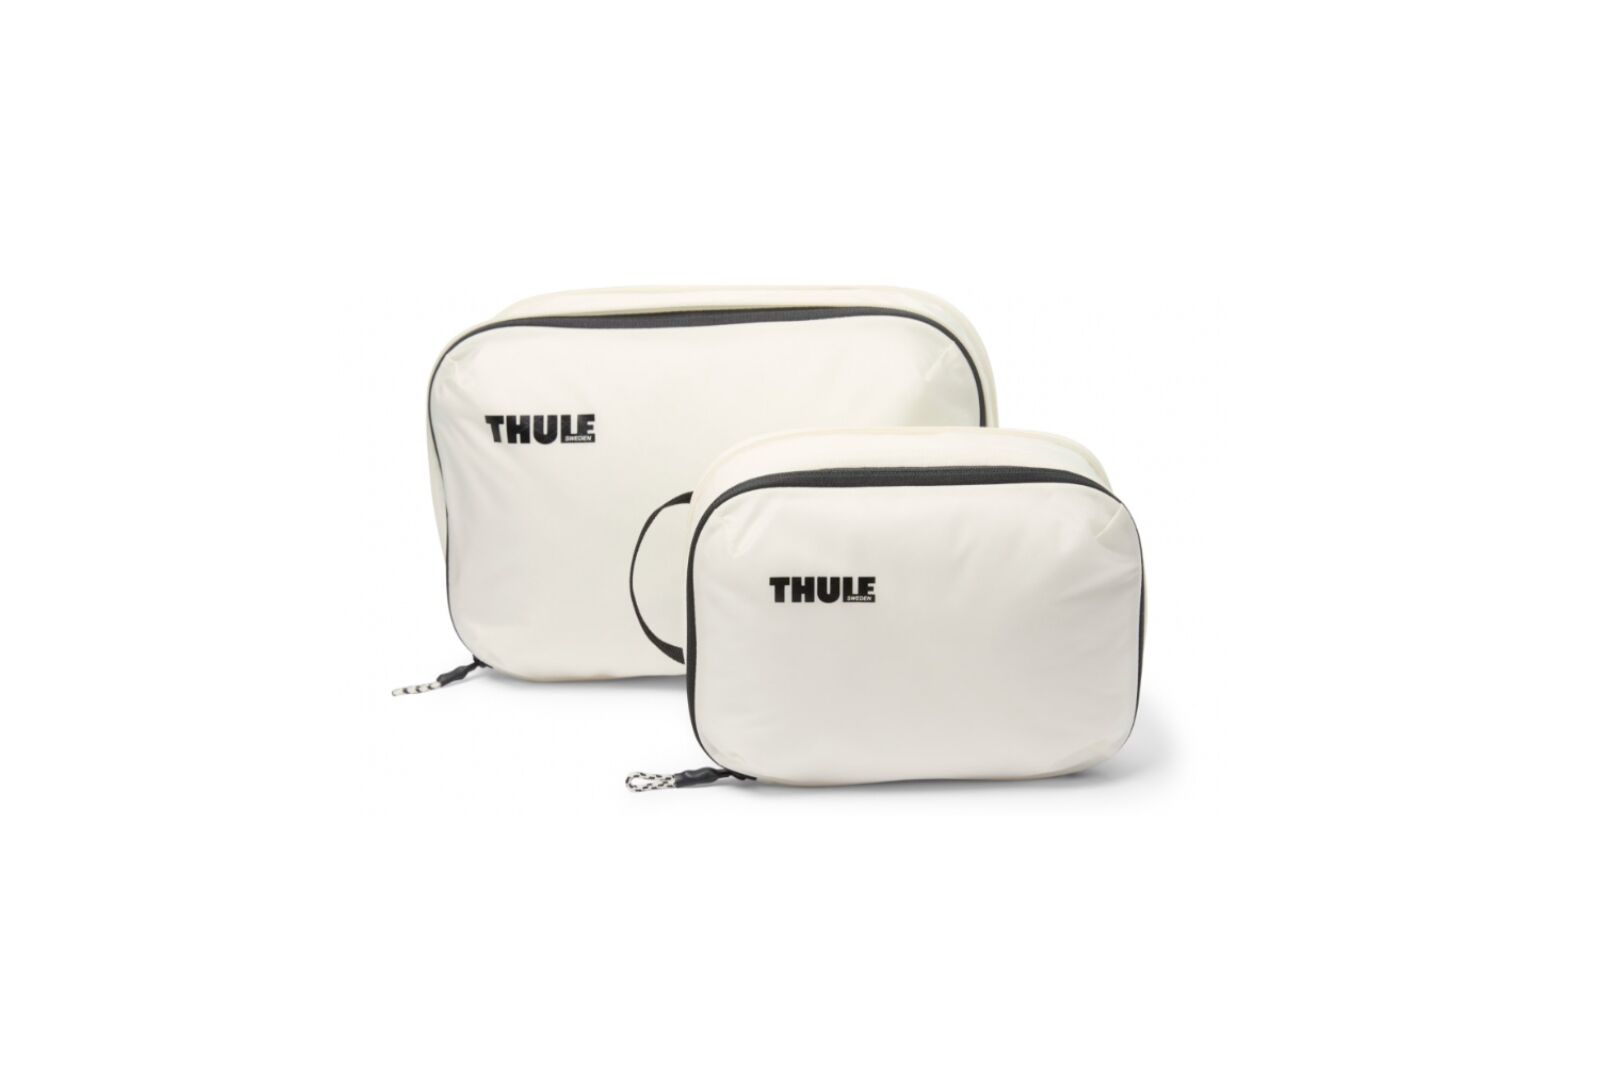 Thule compression packing cube set